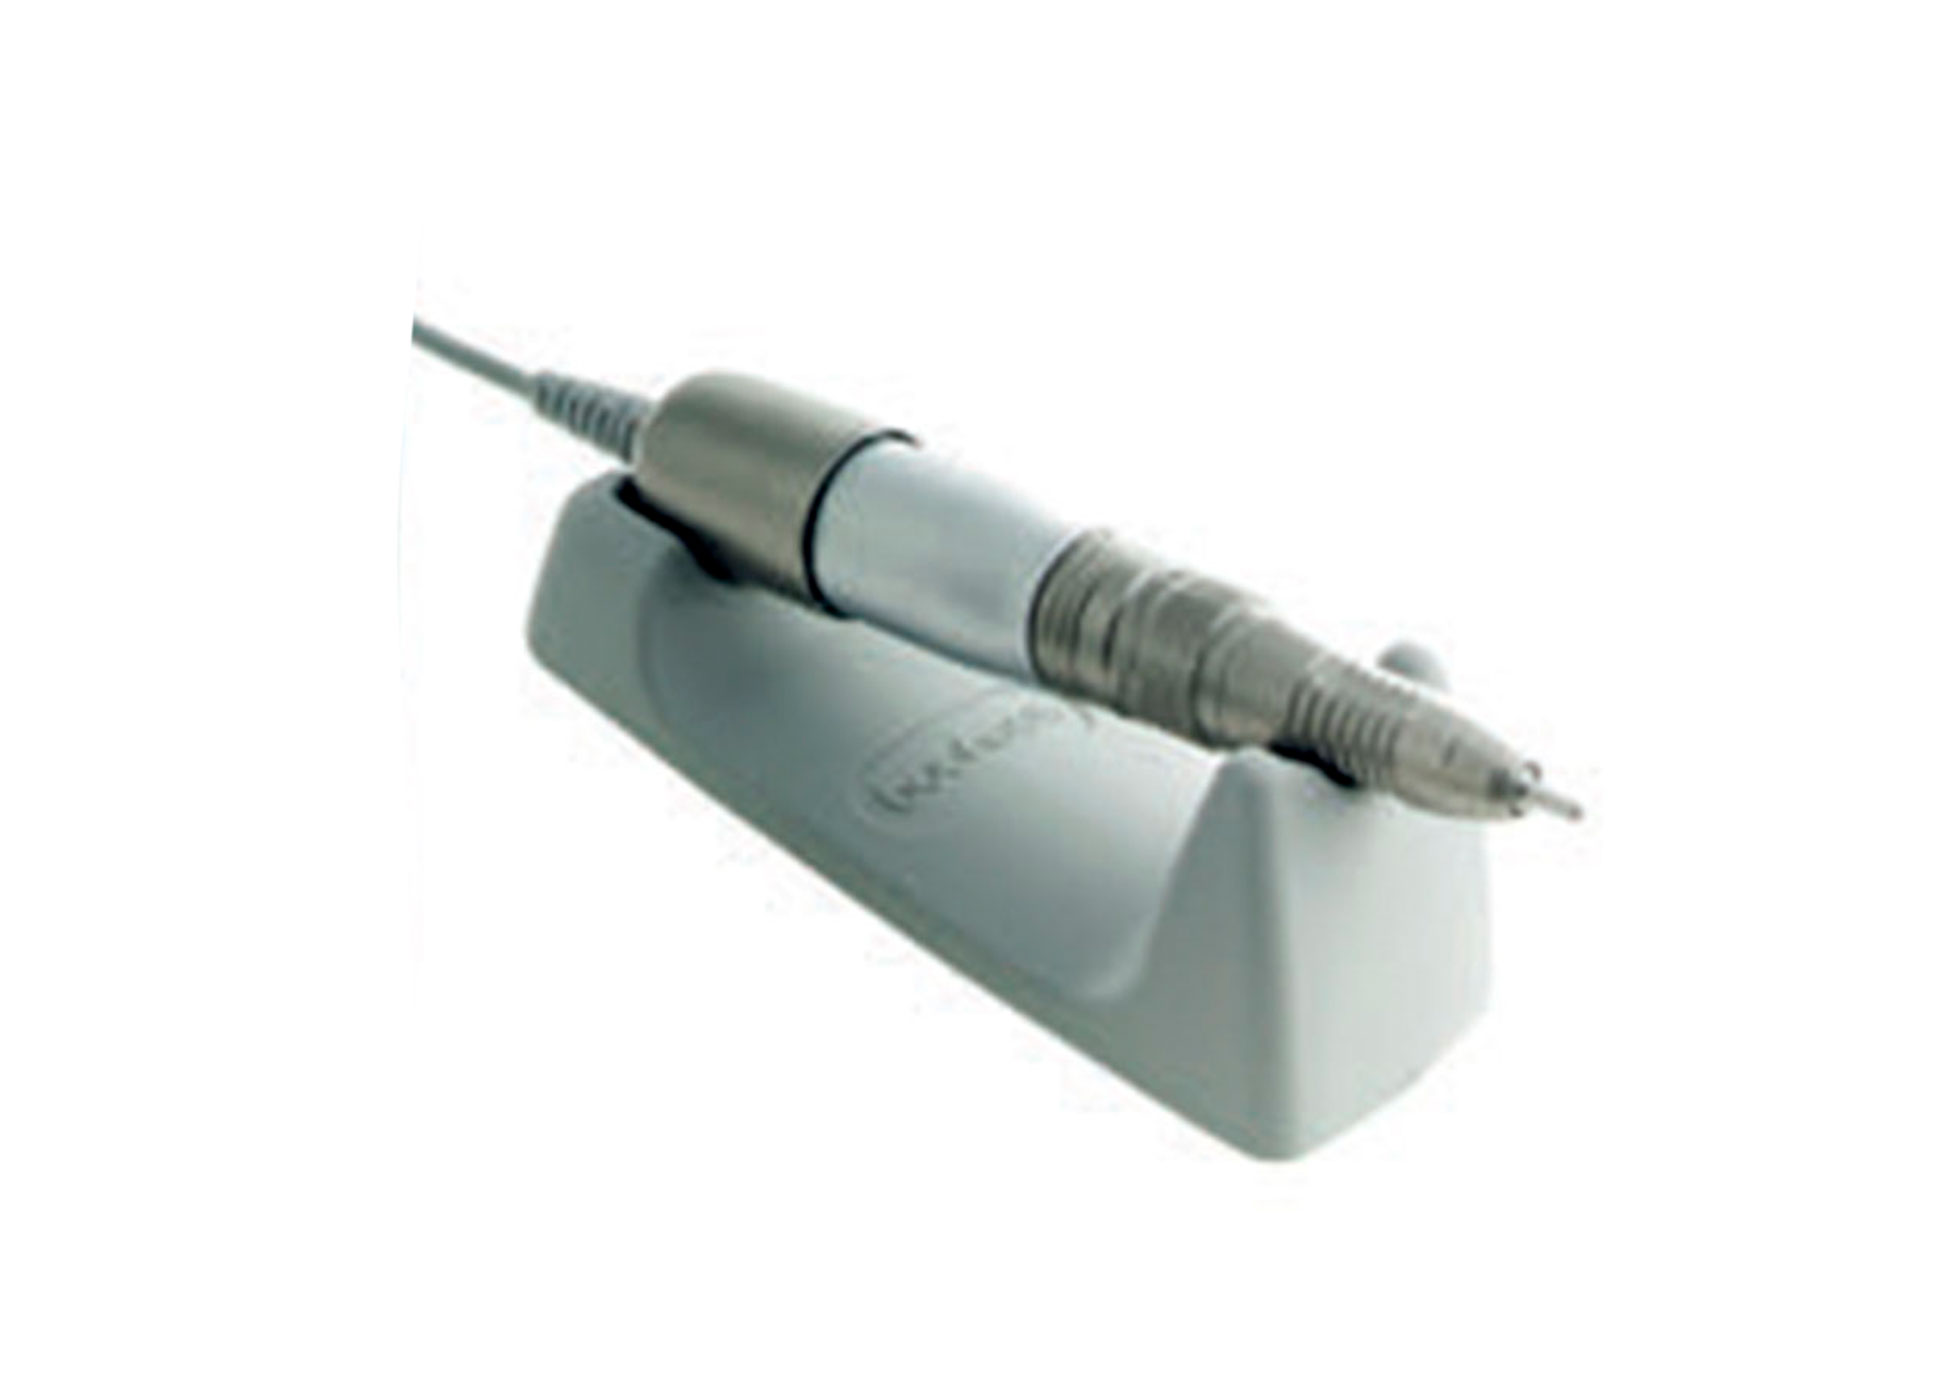 CX-38 Rechargable Portable Micromotor Drill - Drills - CX-38 Handpiece and Lead - Autoclavable handpiece